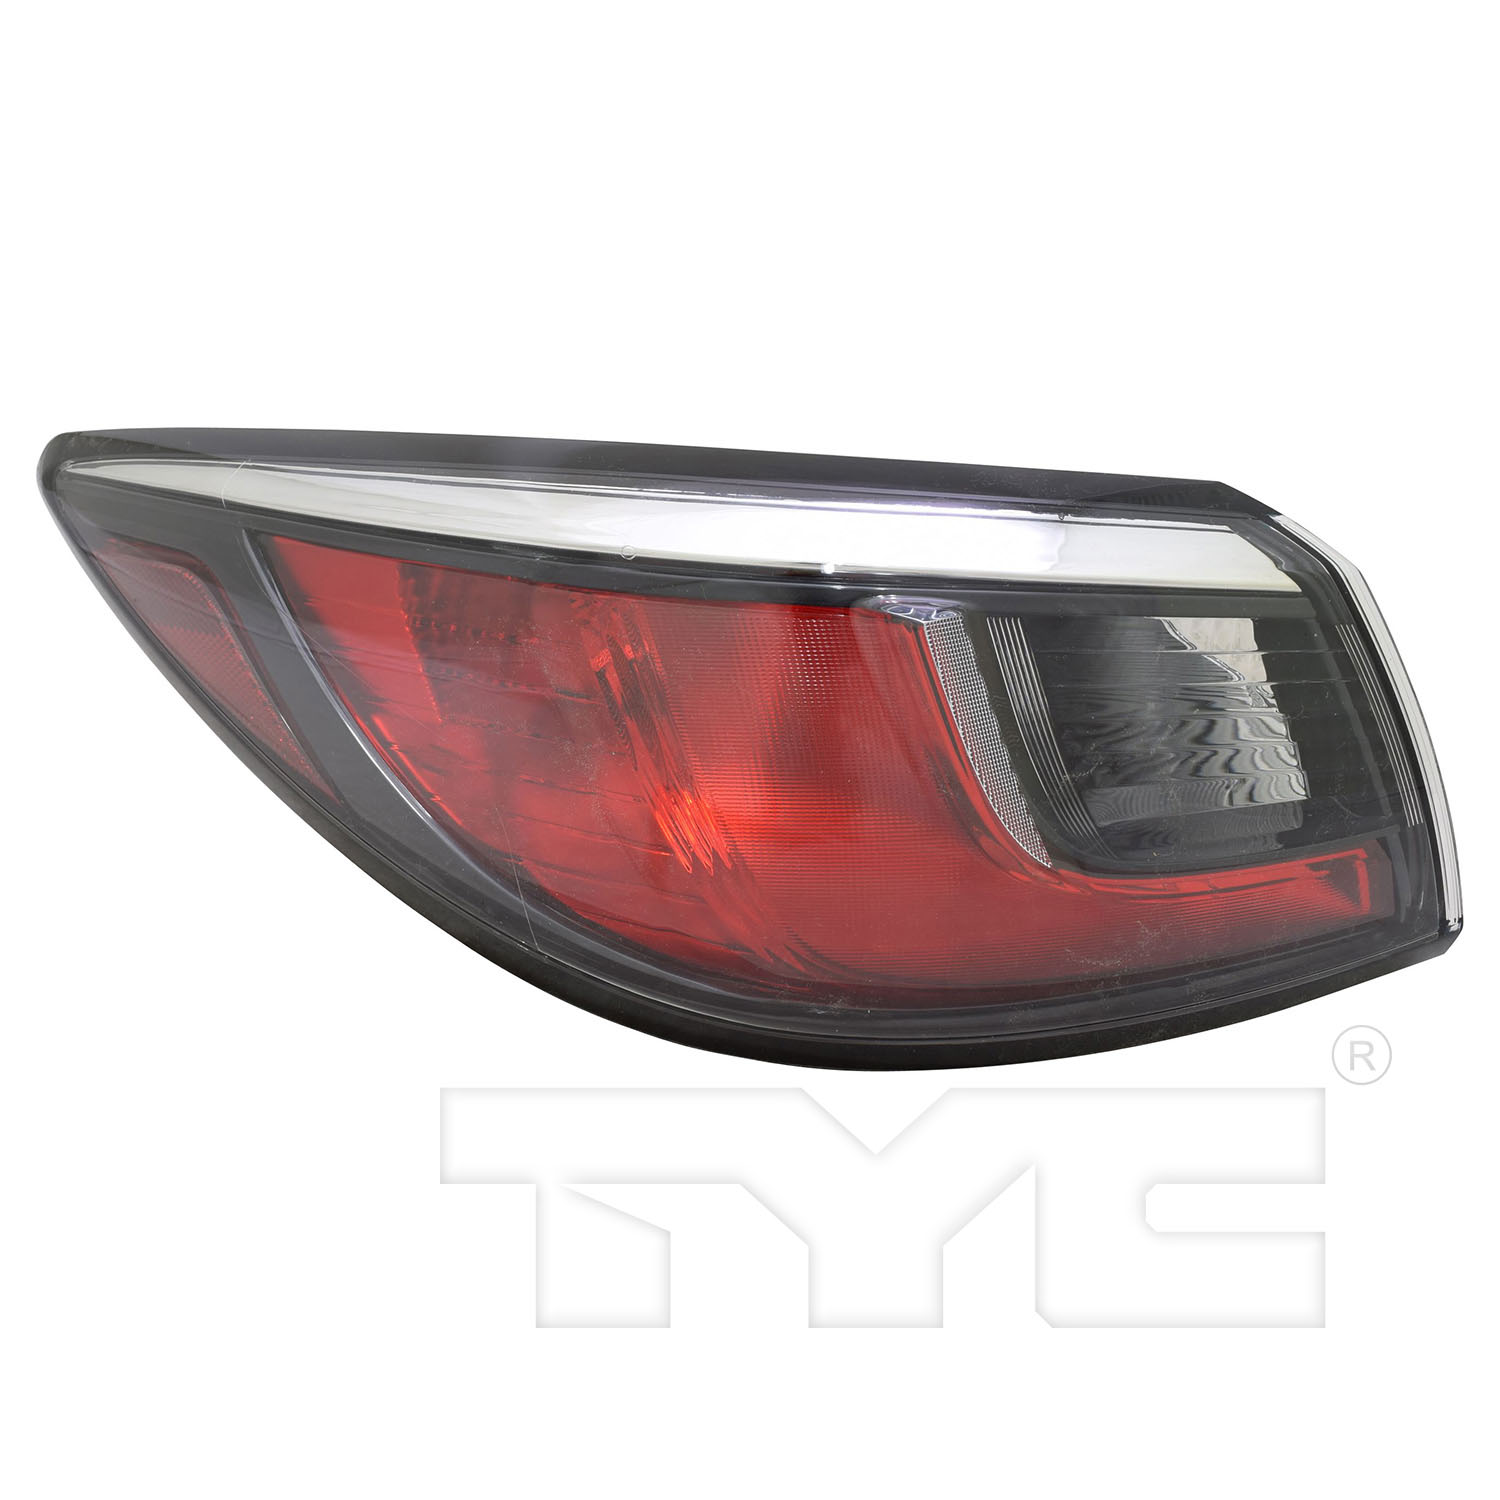 Aftermarket TAILLIGHTS for TOYOTA - YARIS, YARIS,16-20,LT Taillamp assy outer